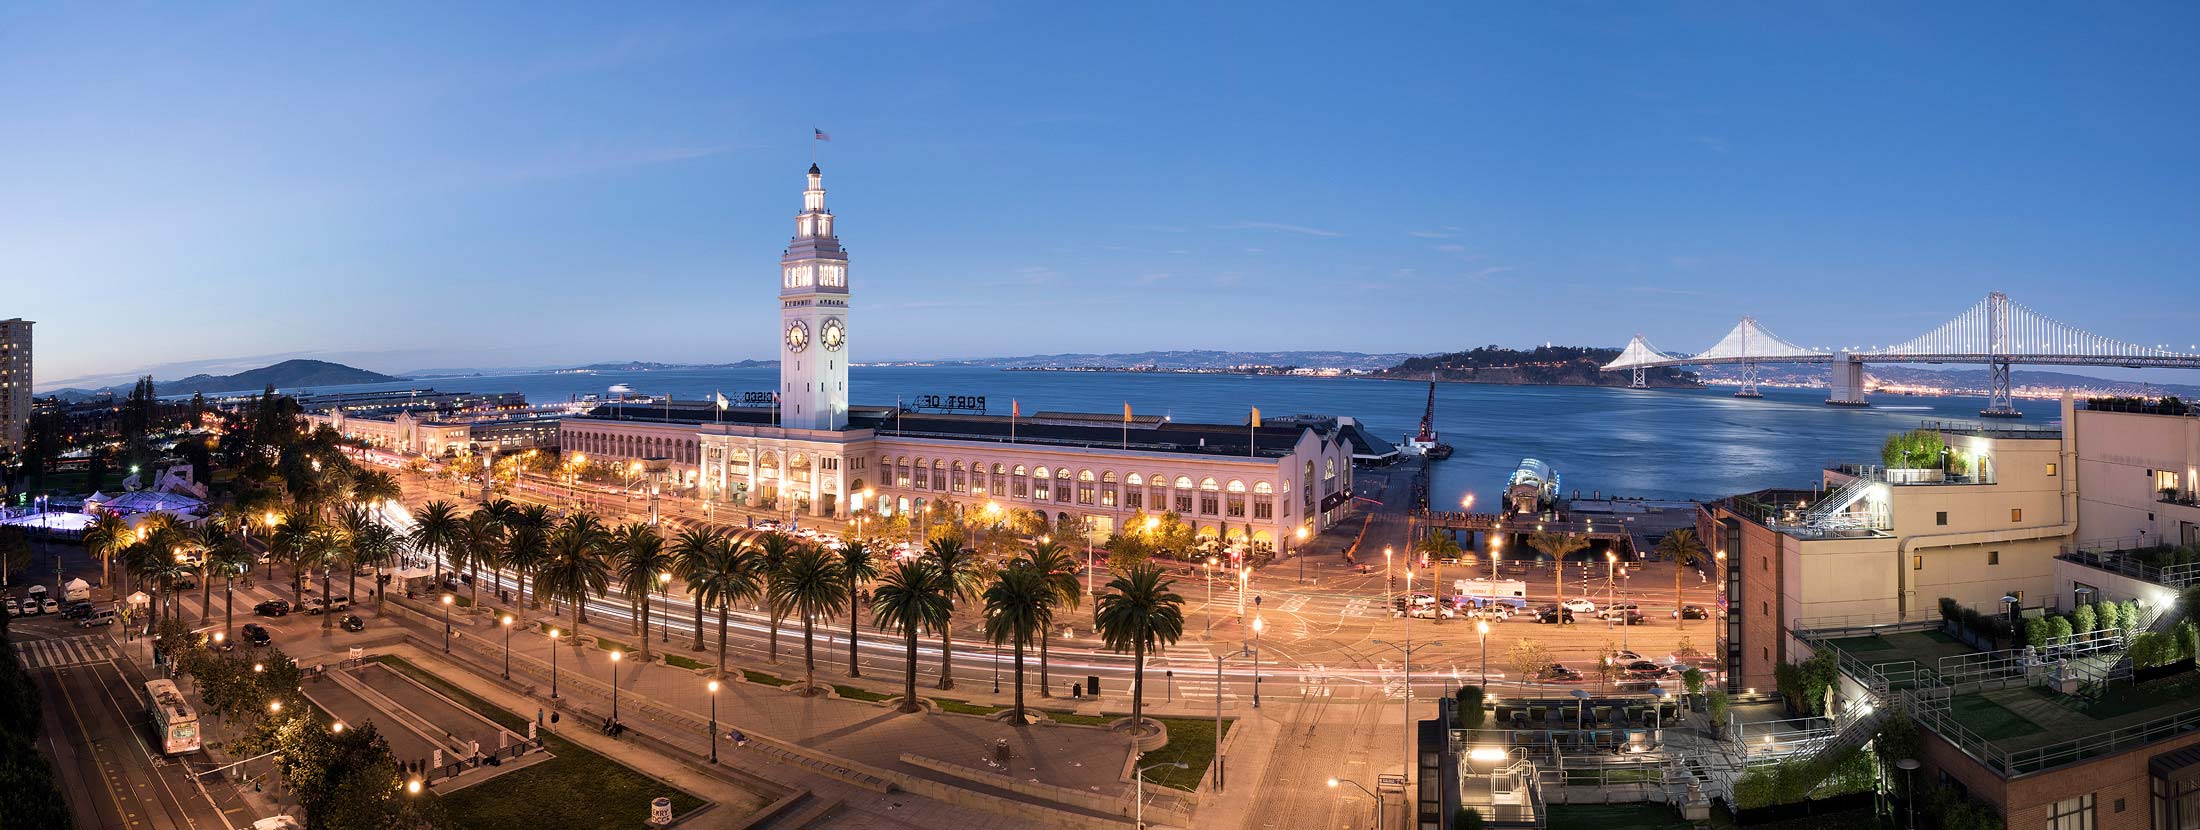 The Ferry Building in San Francisco California 